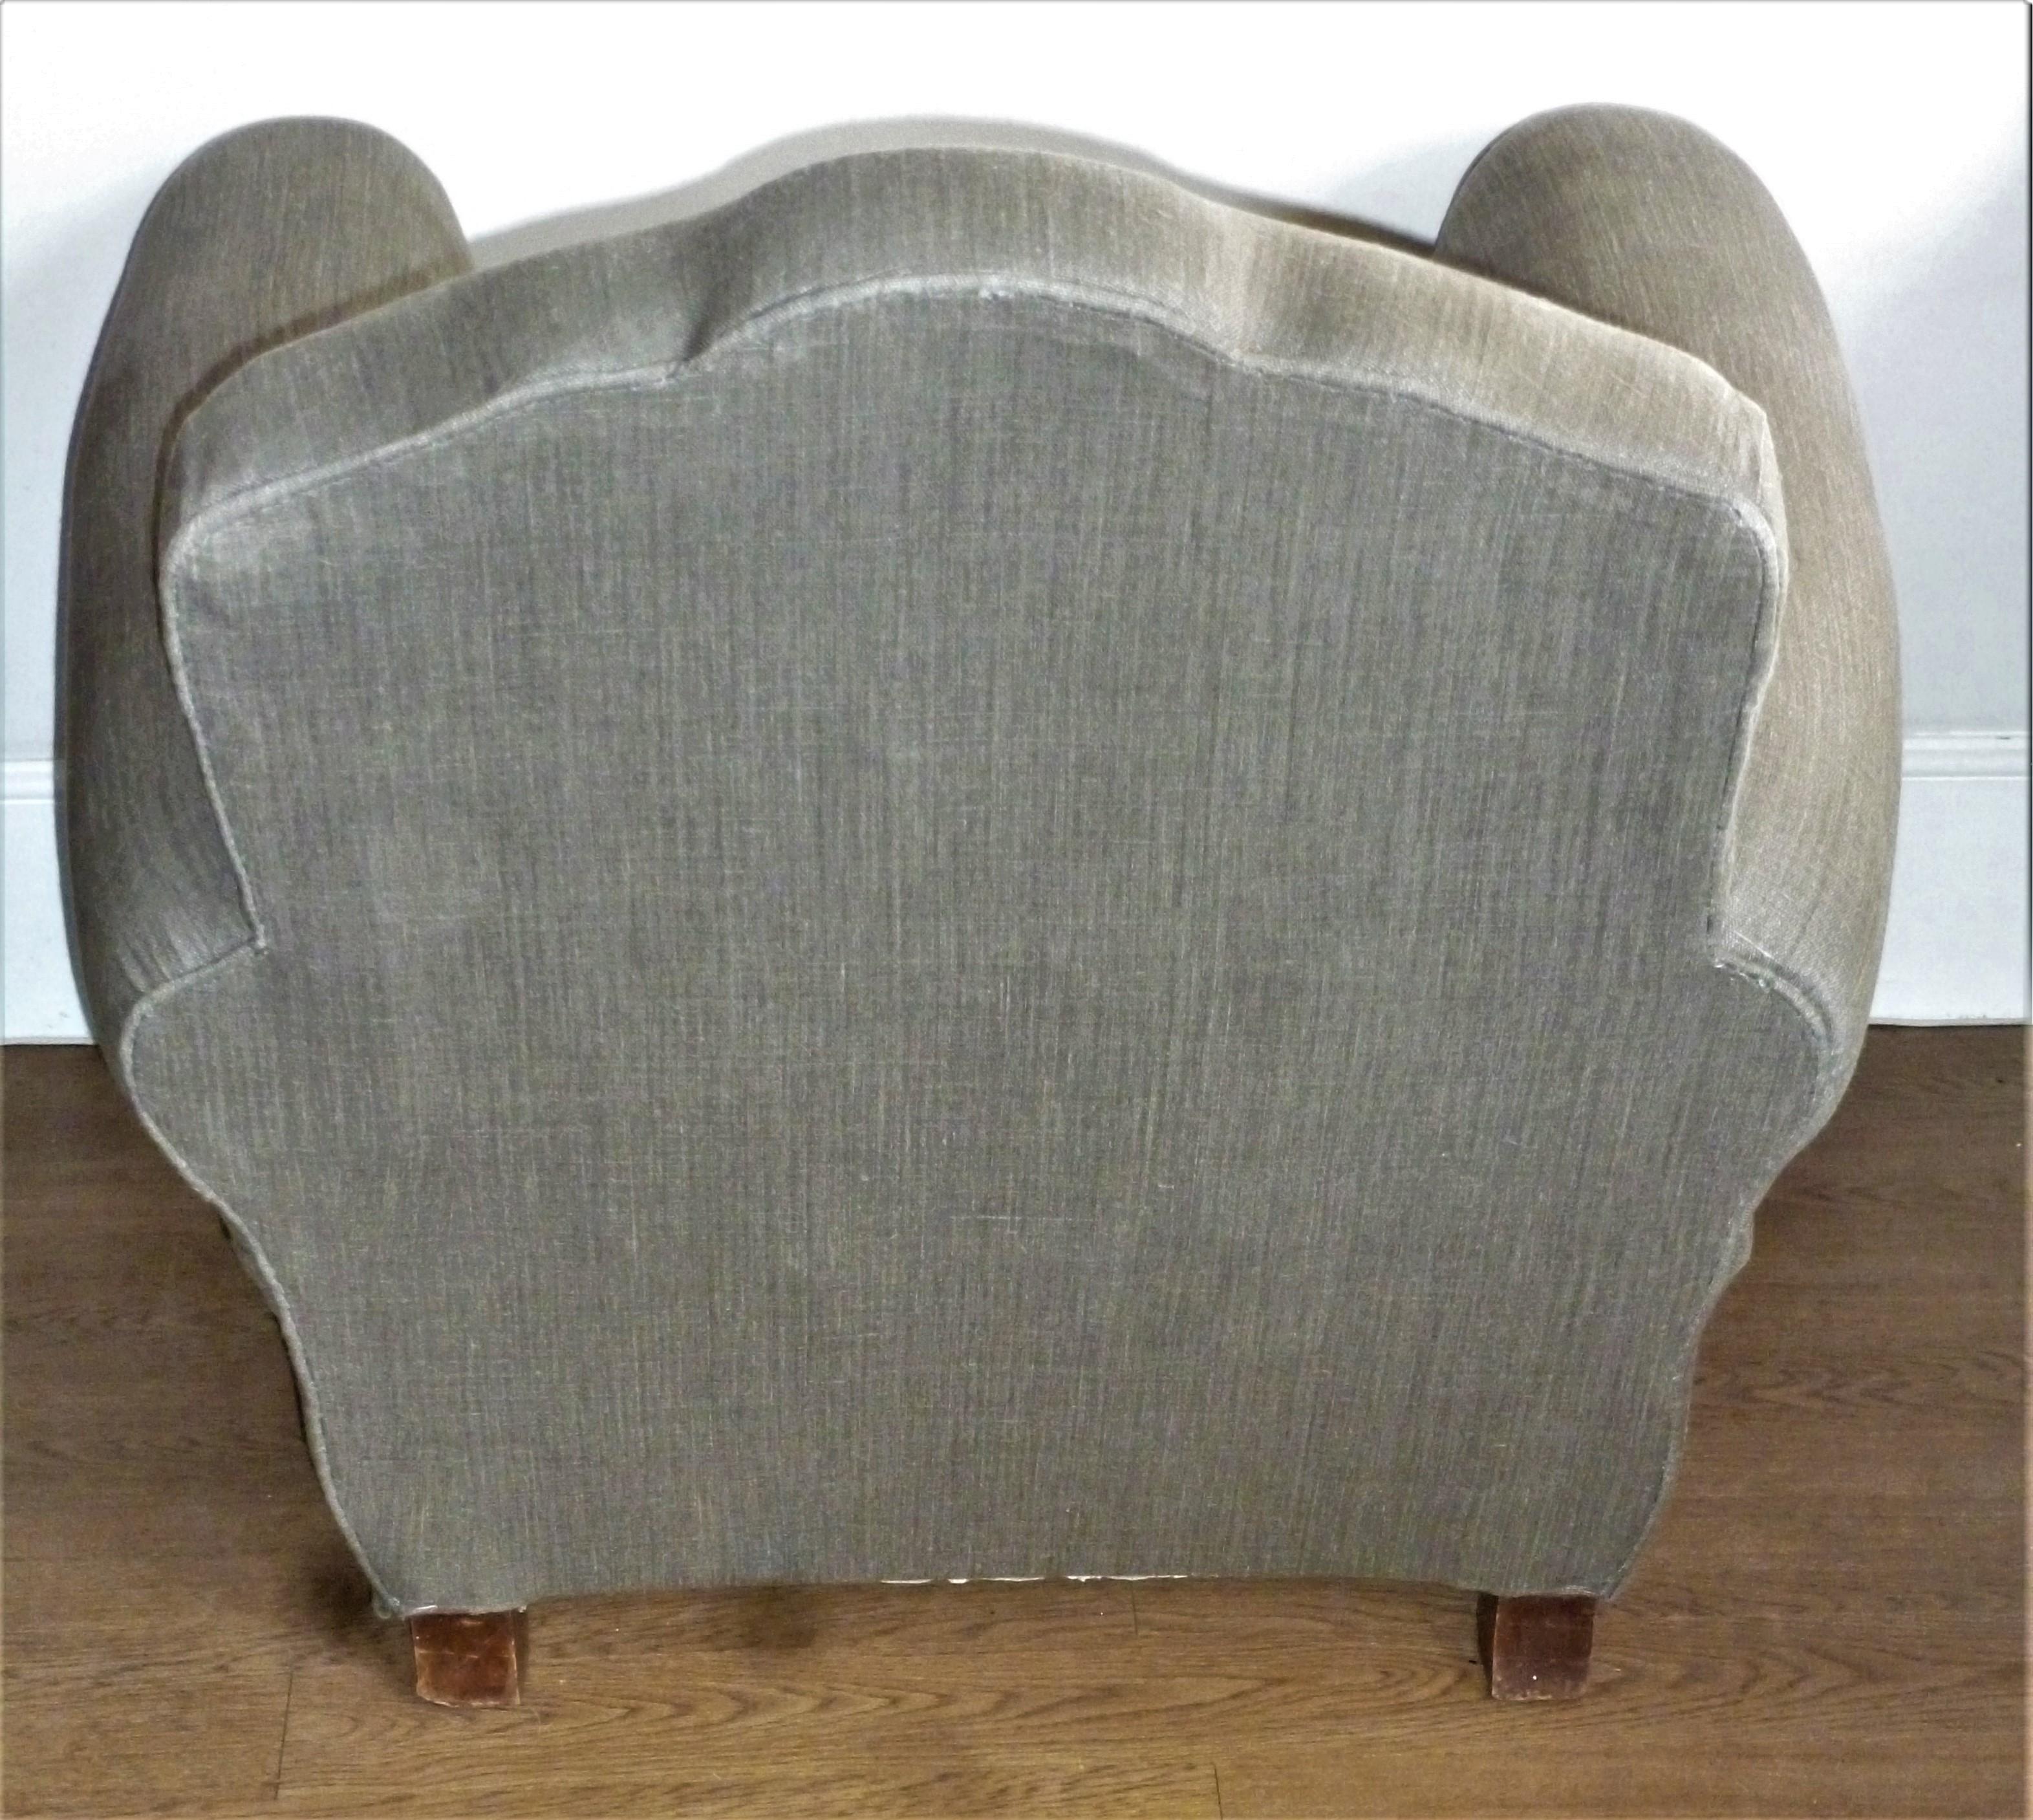 Iconic 1940 French Art Deco Club Chair Armchair Re-Upholstered Grey French Linen For Sale 4